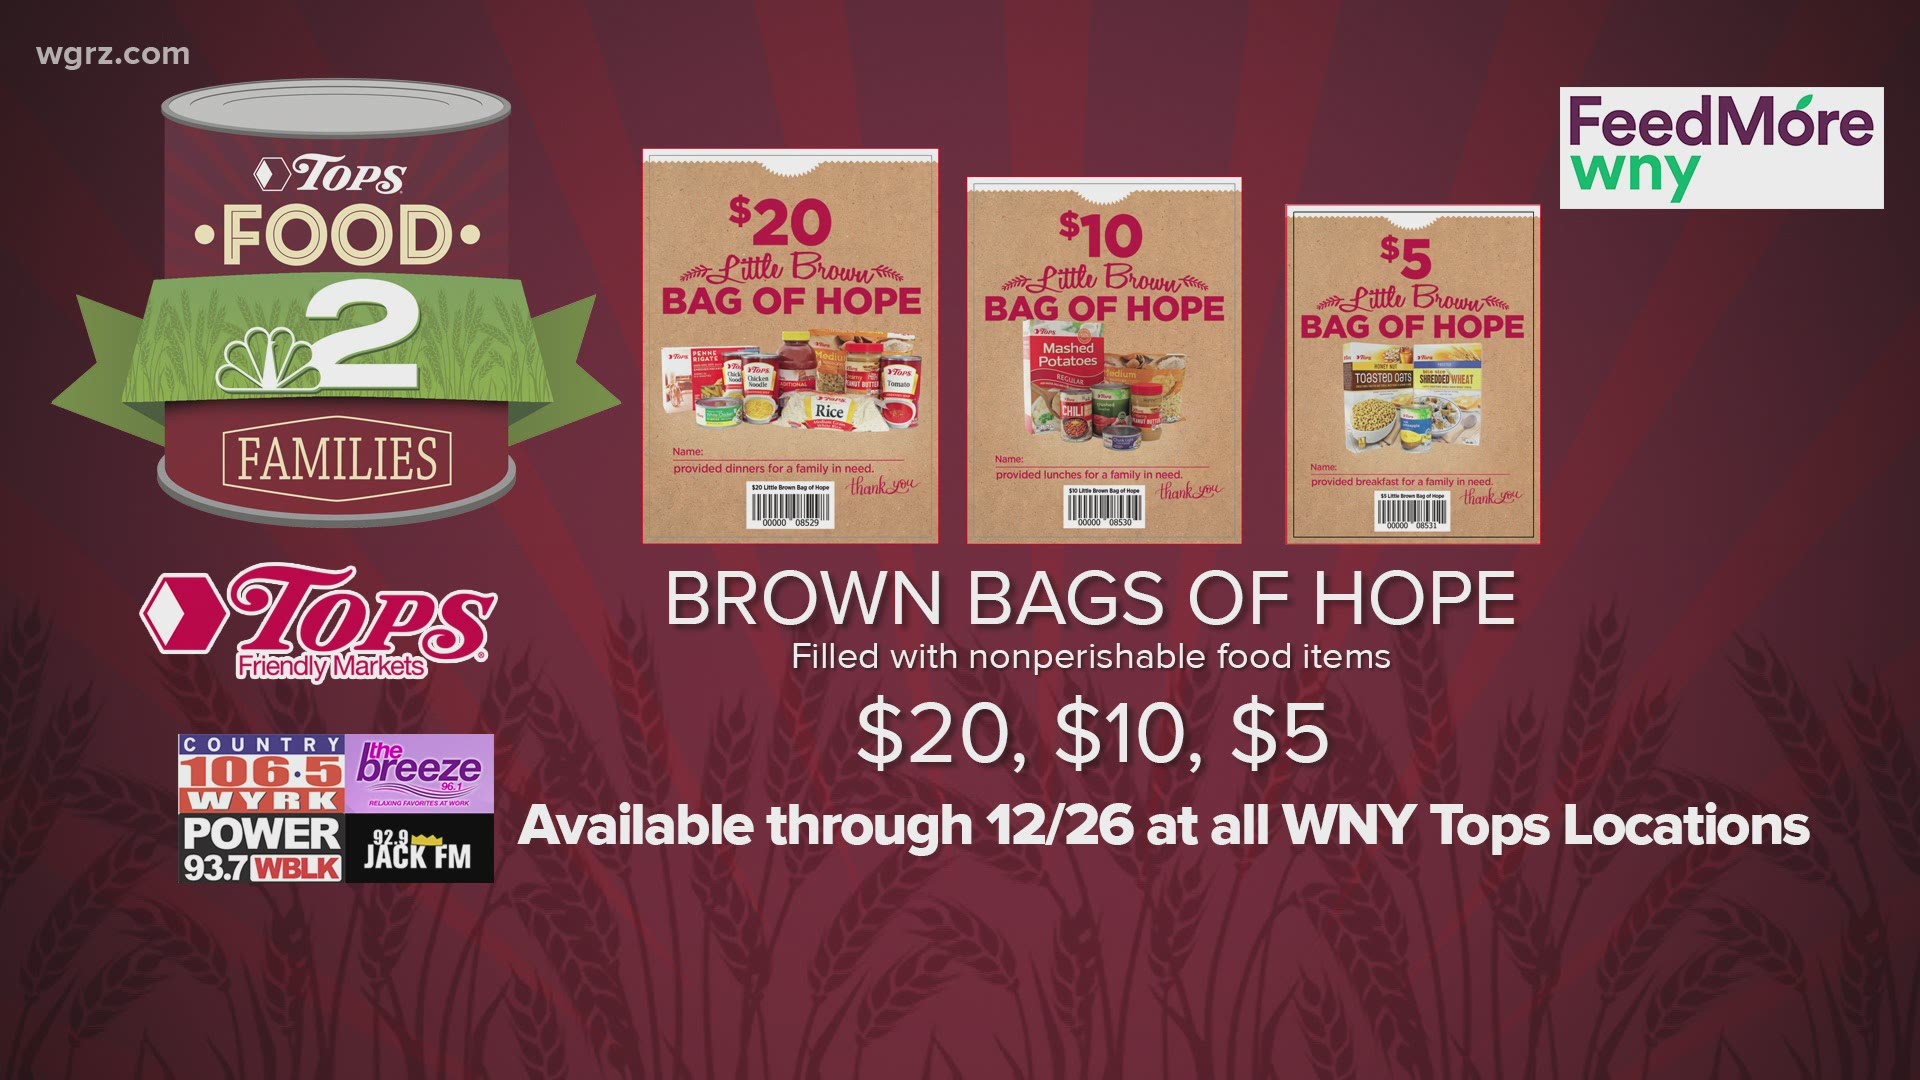 You can buy a "virtual" little brown bag of hope at area Tops locations through December 26th.
And this Friday you can drive up and donate money or non-perishables.